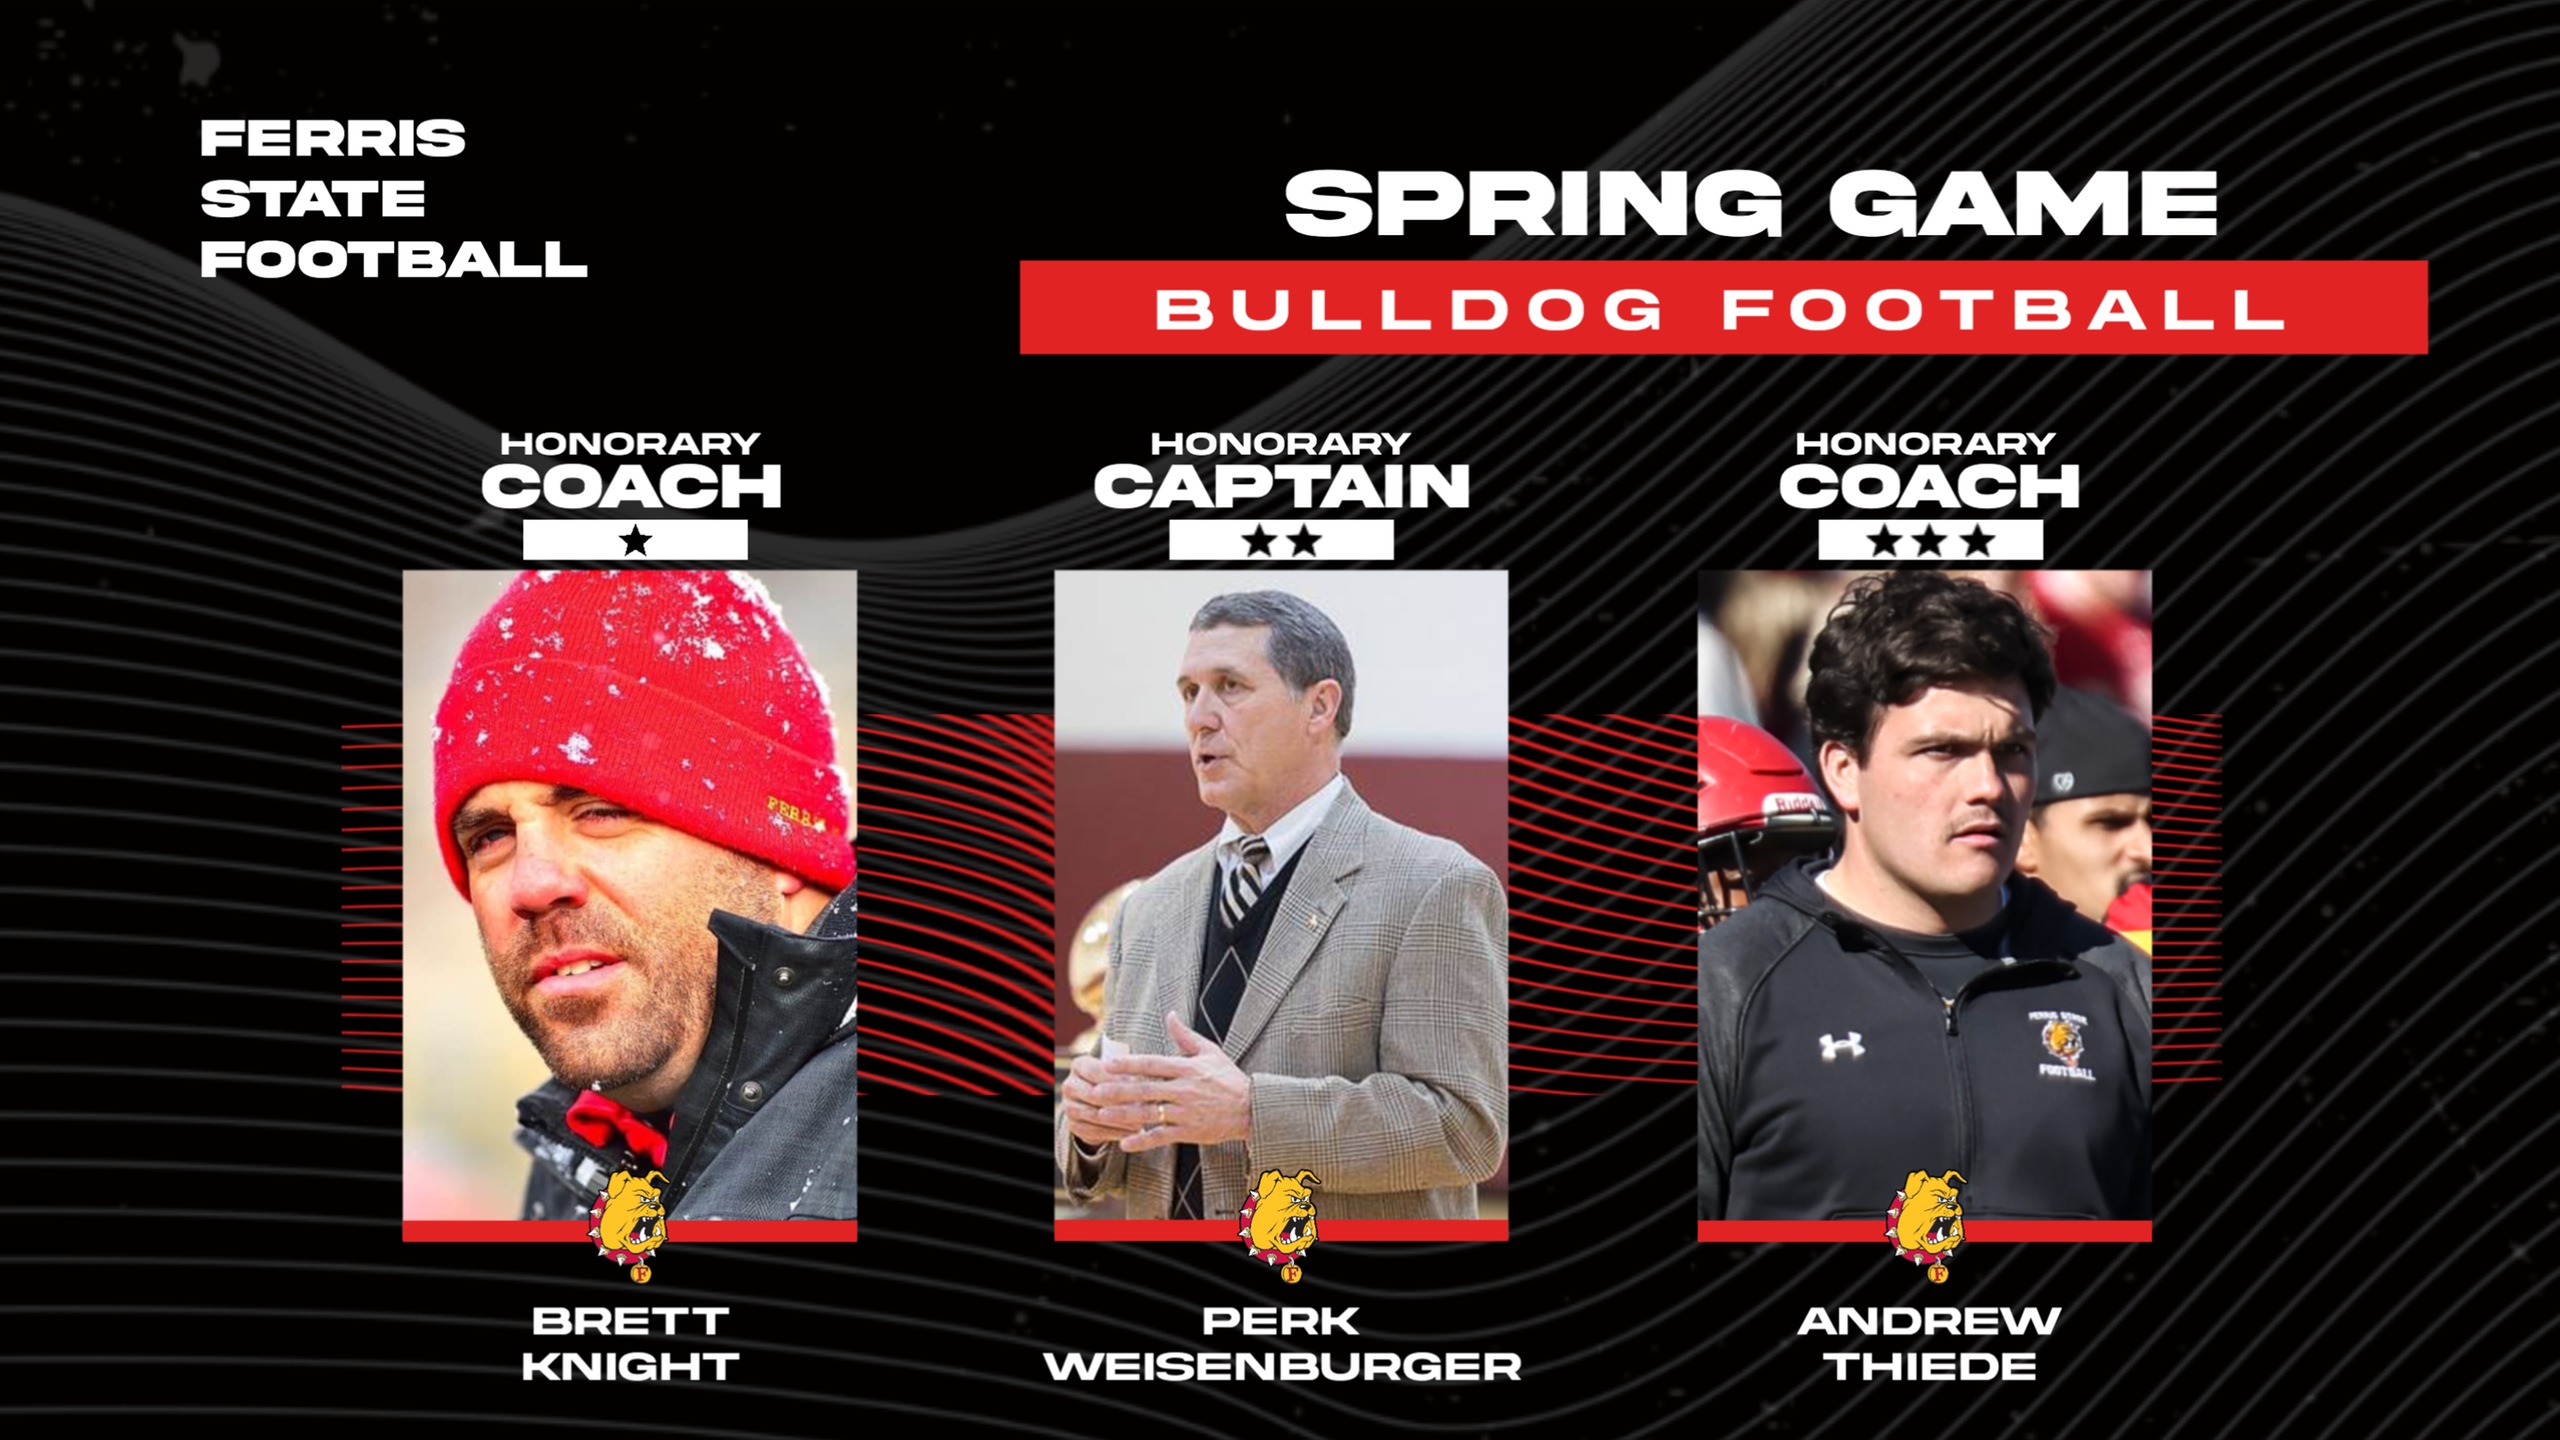 Ferris State Football To Honor Three Key Individuals During Friday's Spring Game